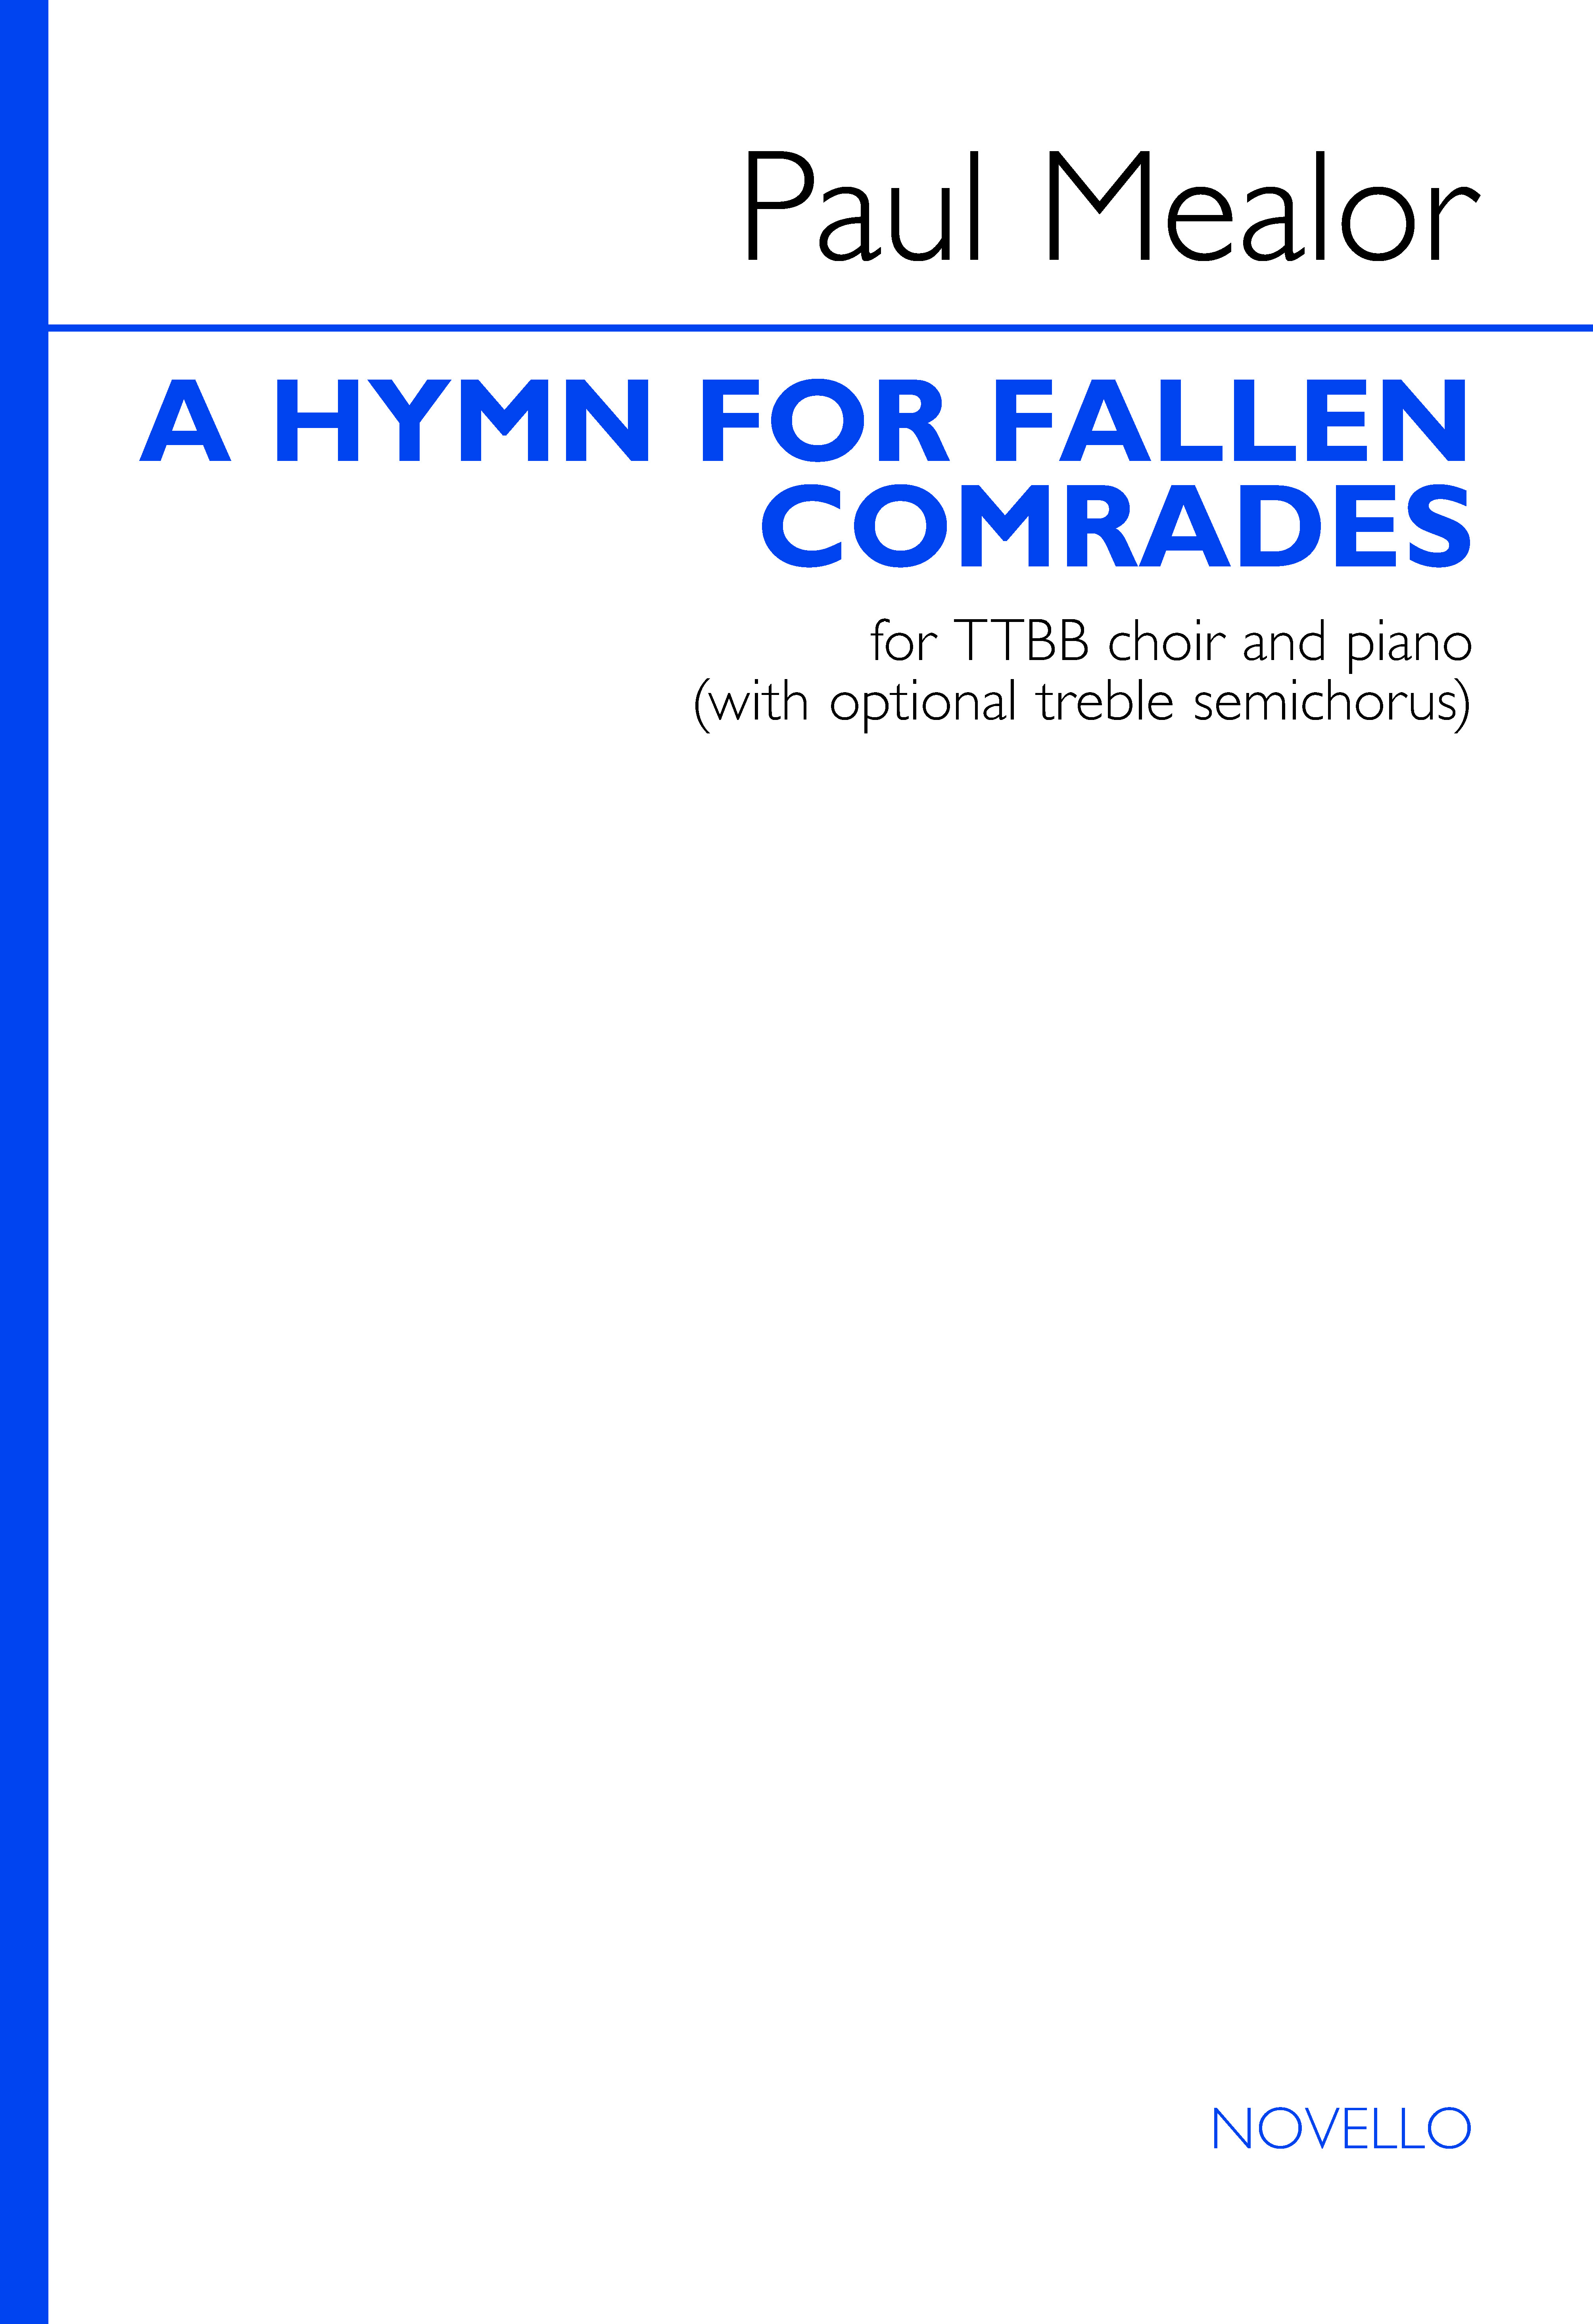 Paul Mealor: A Hymn For Fallen Comrades: Lower Voices and Piano/Organ: Choral